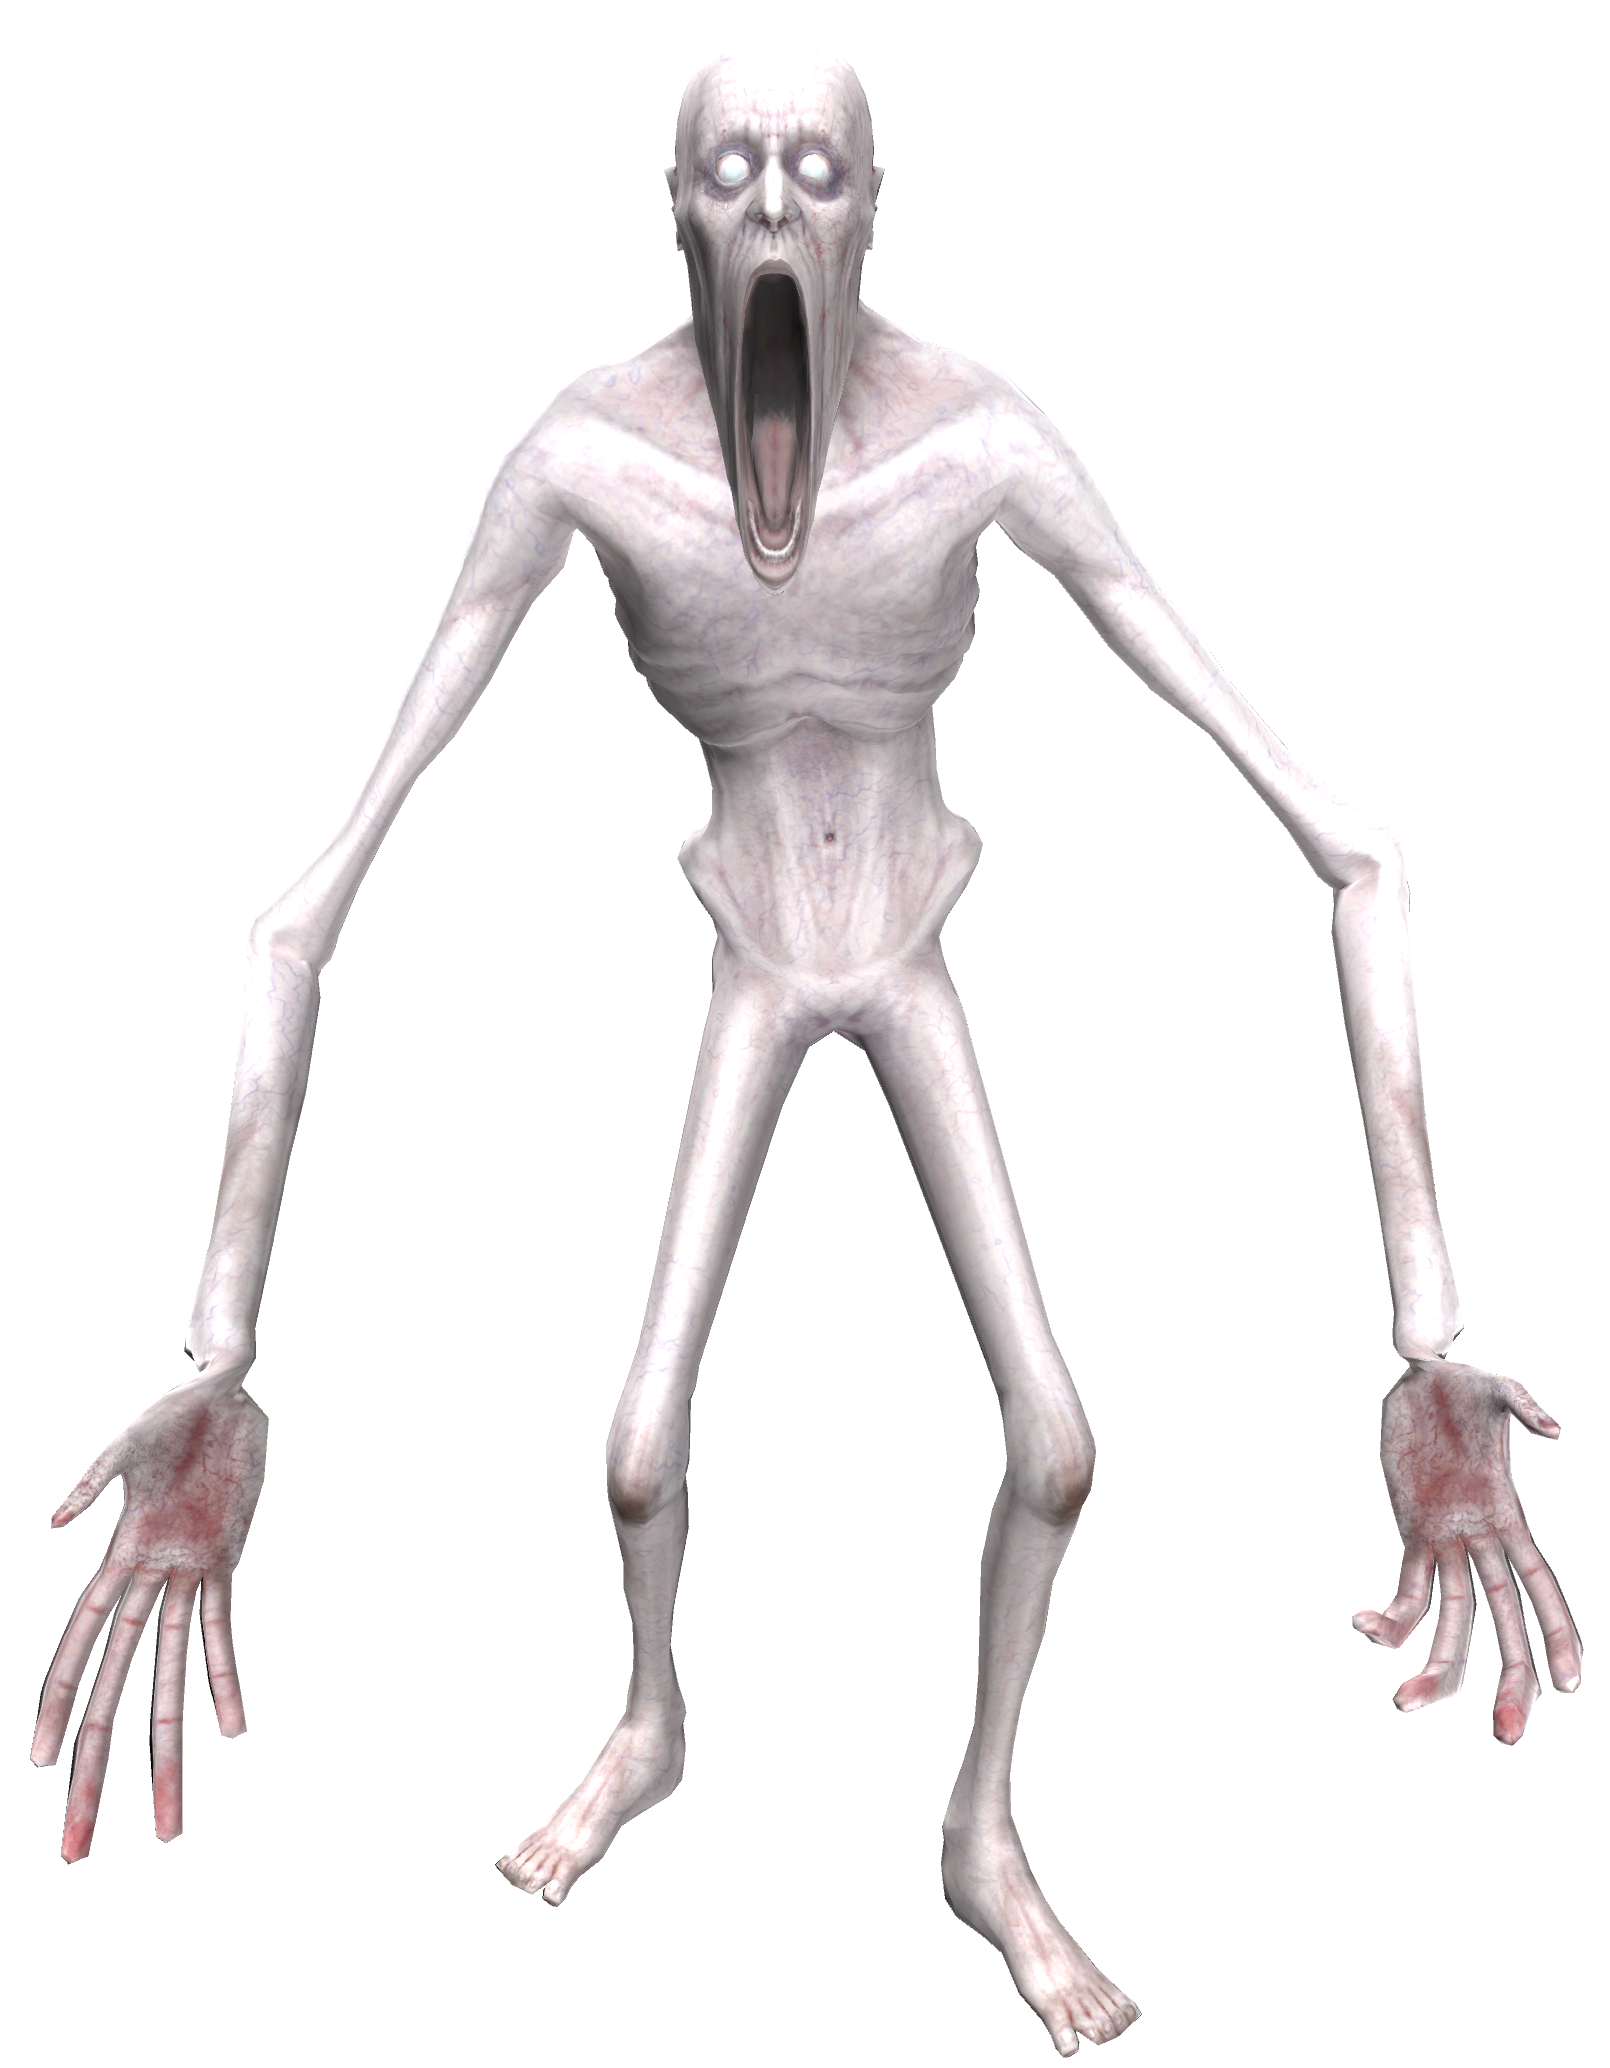 SCP-939, Slender Fortress Non-Official Wikia